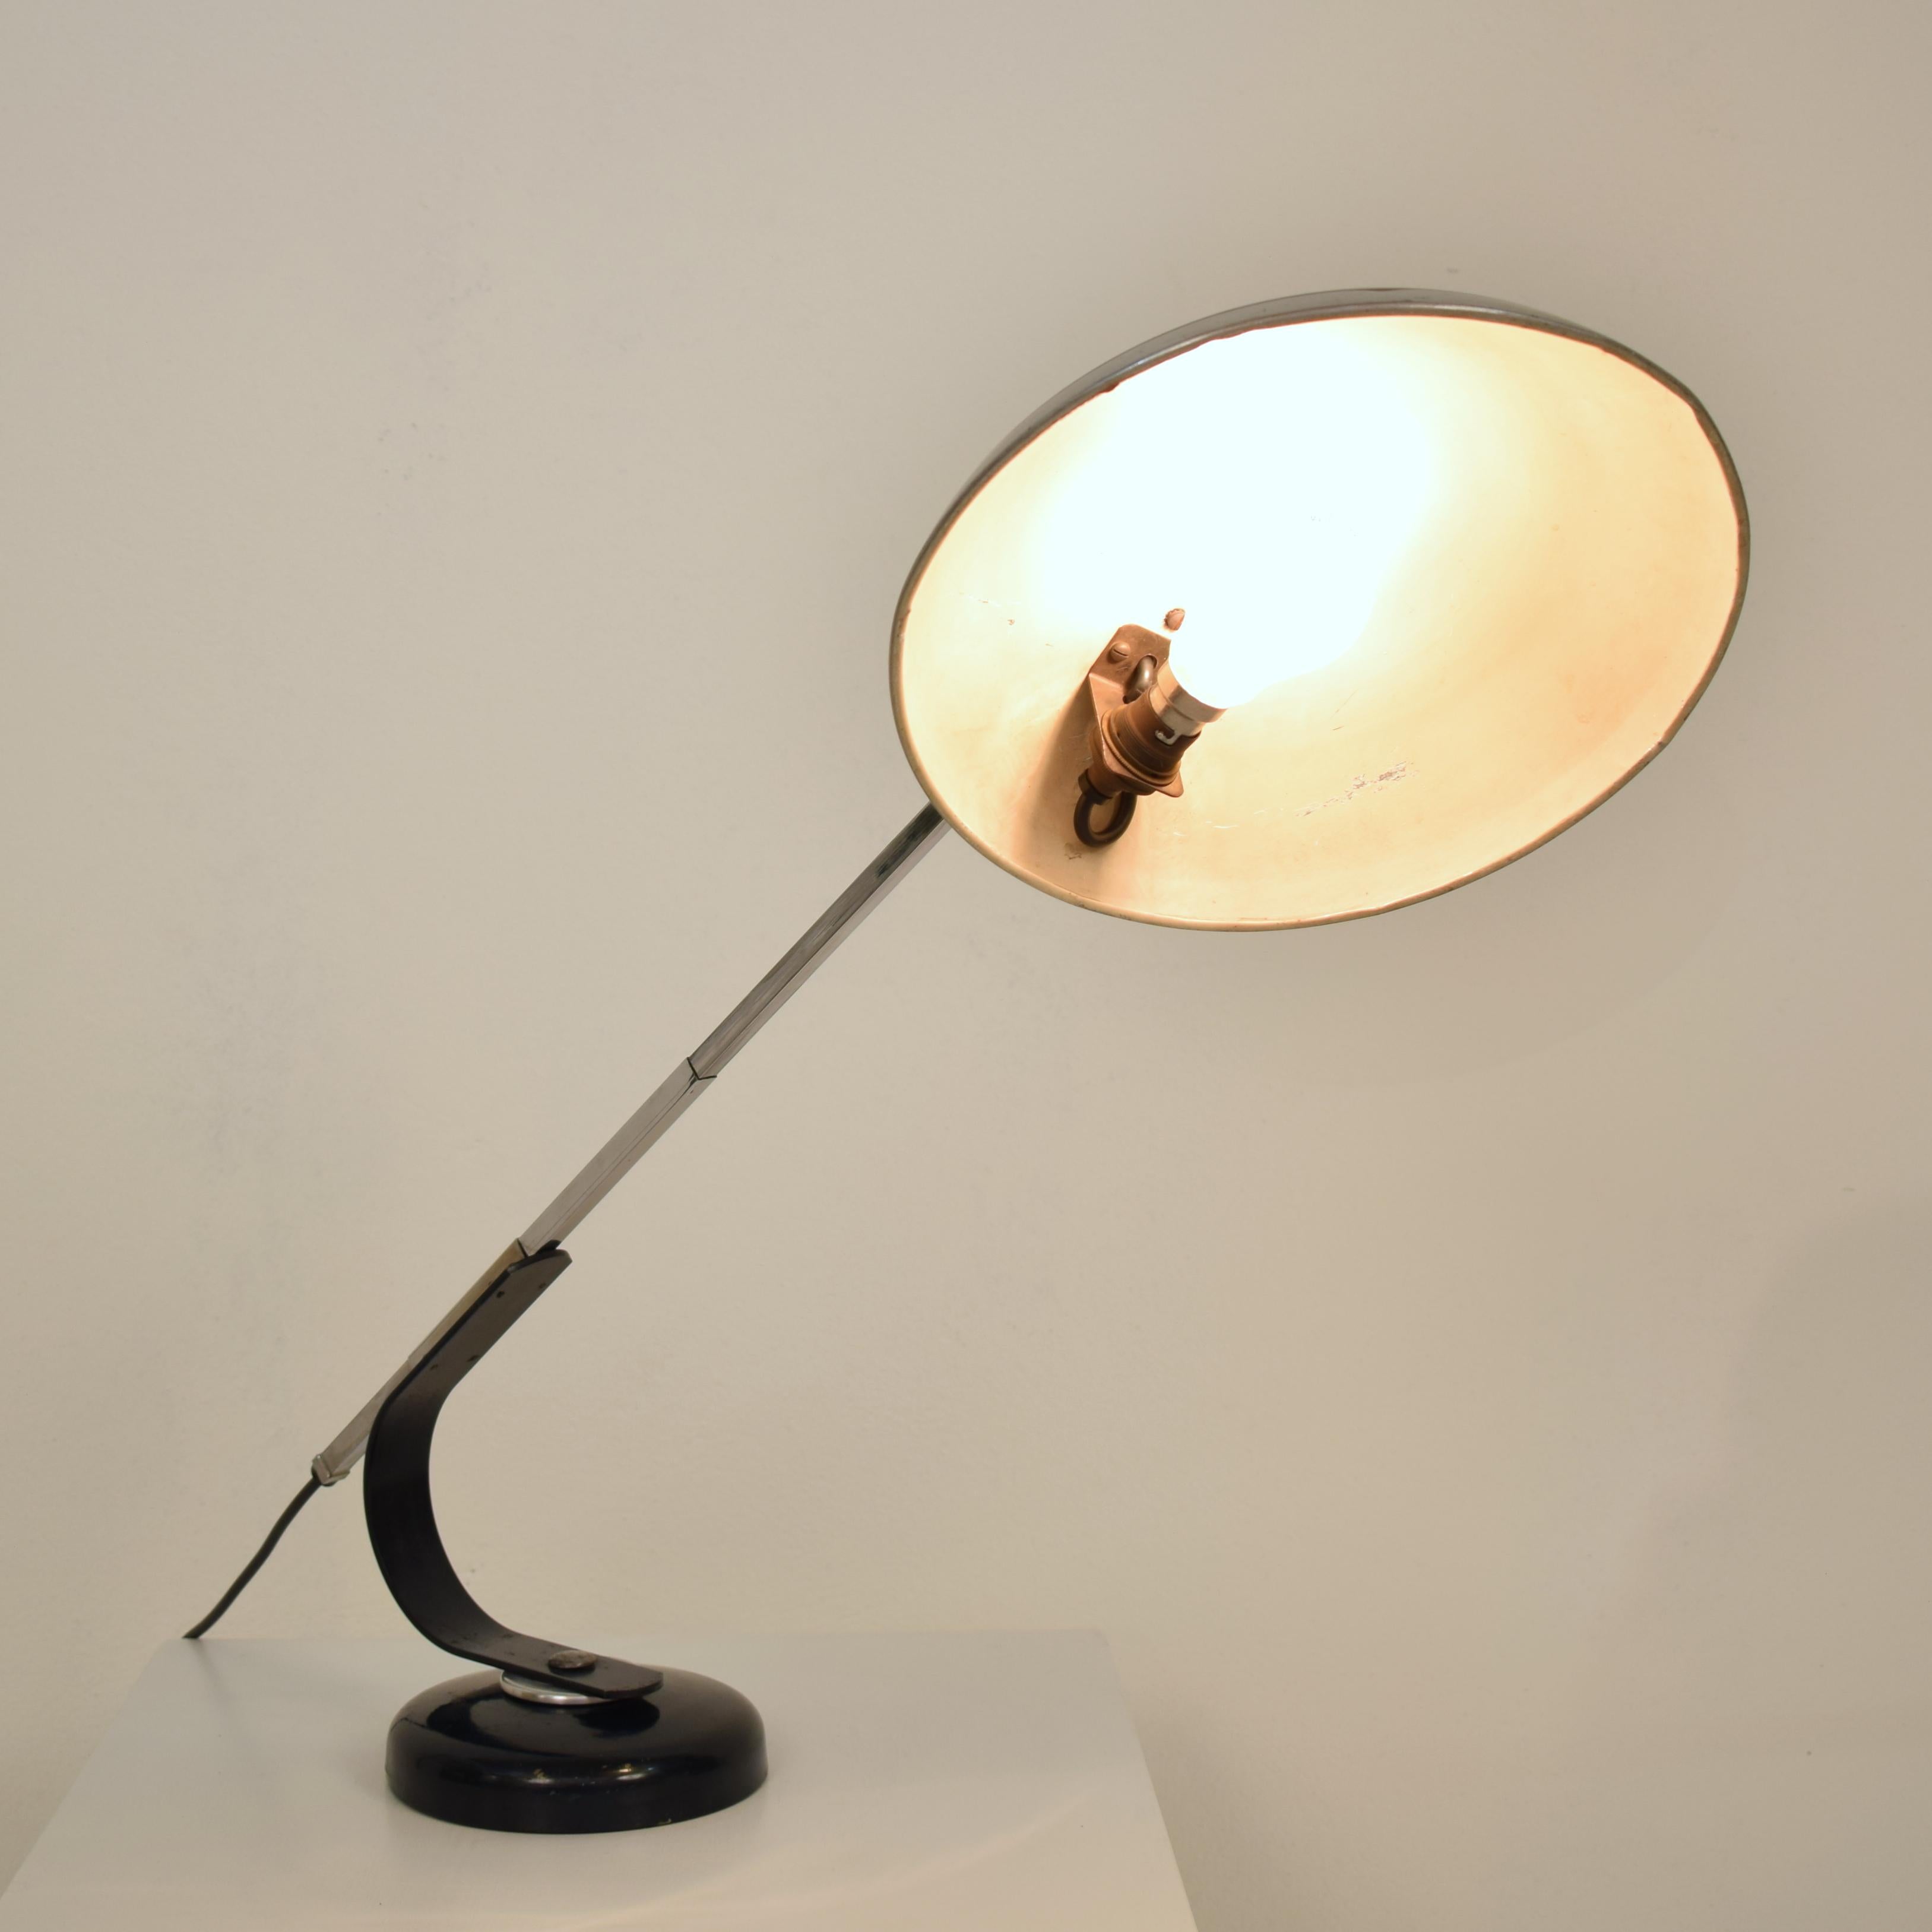 Midcentury Dark Green French Table Lamp with Telescope Function, circa 1945 In Good Condition For Sale In Berlin, DE